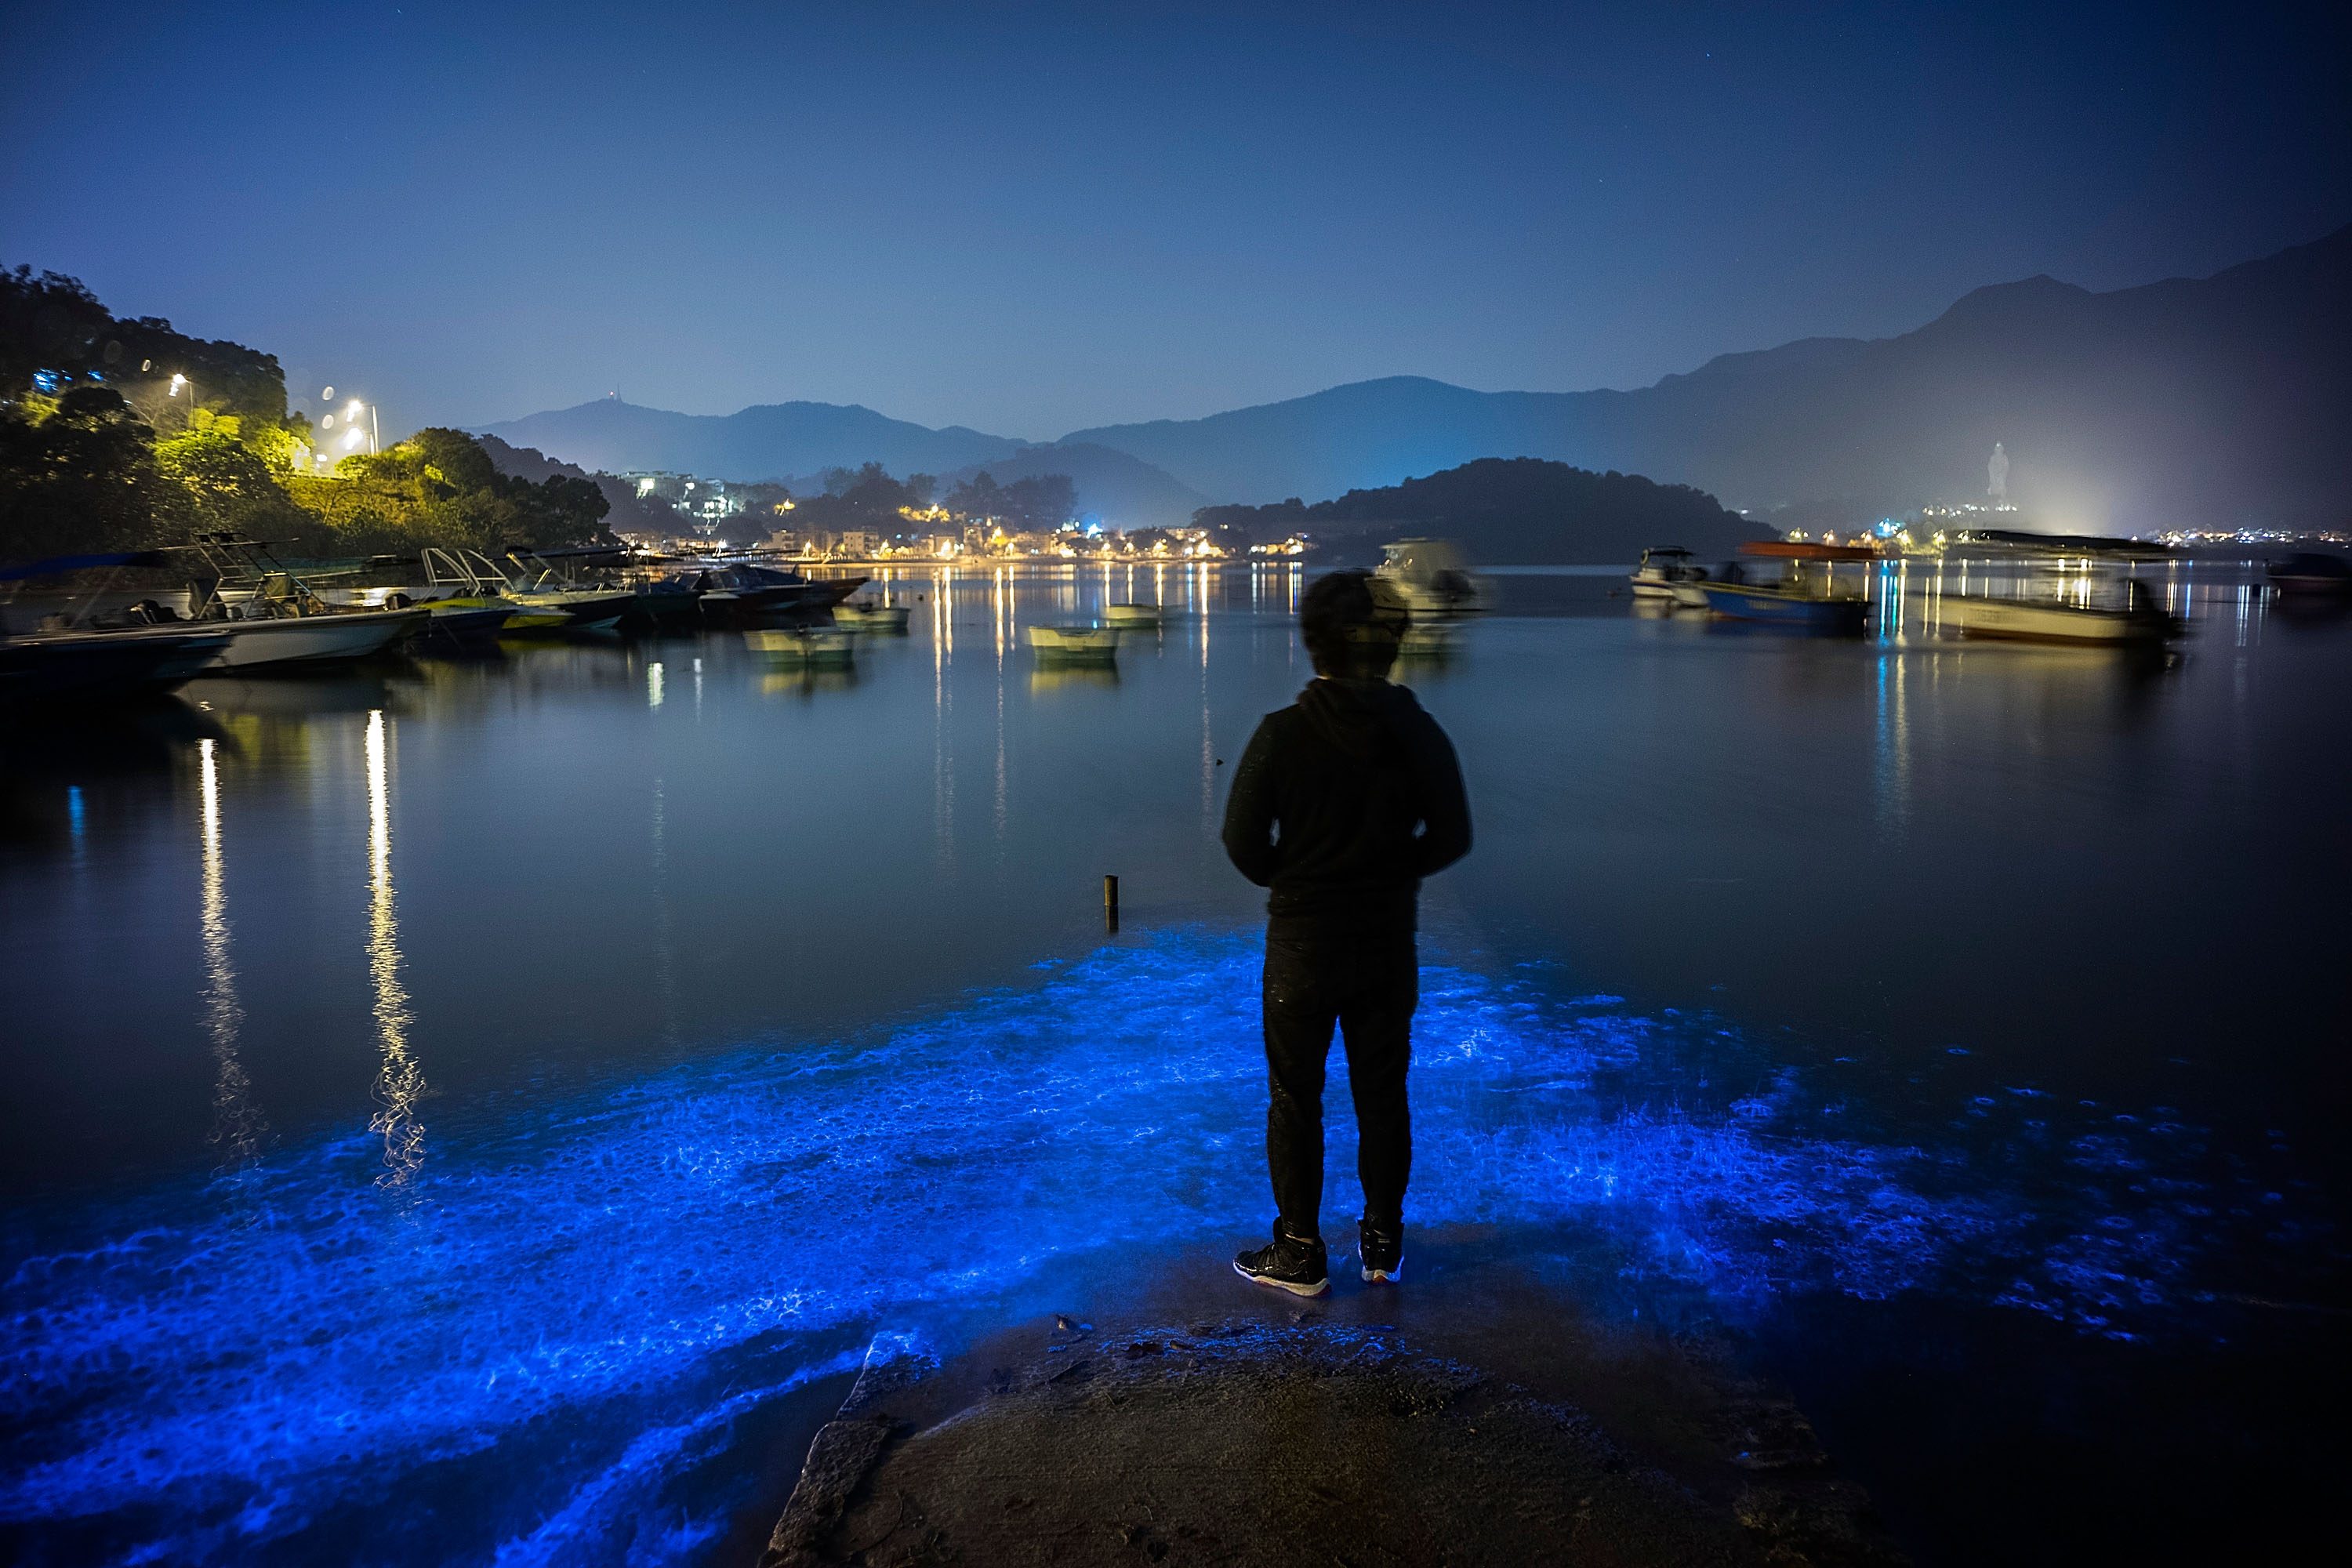 Blue Glow Appears On Hong Kong's Shores